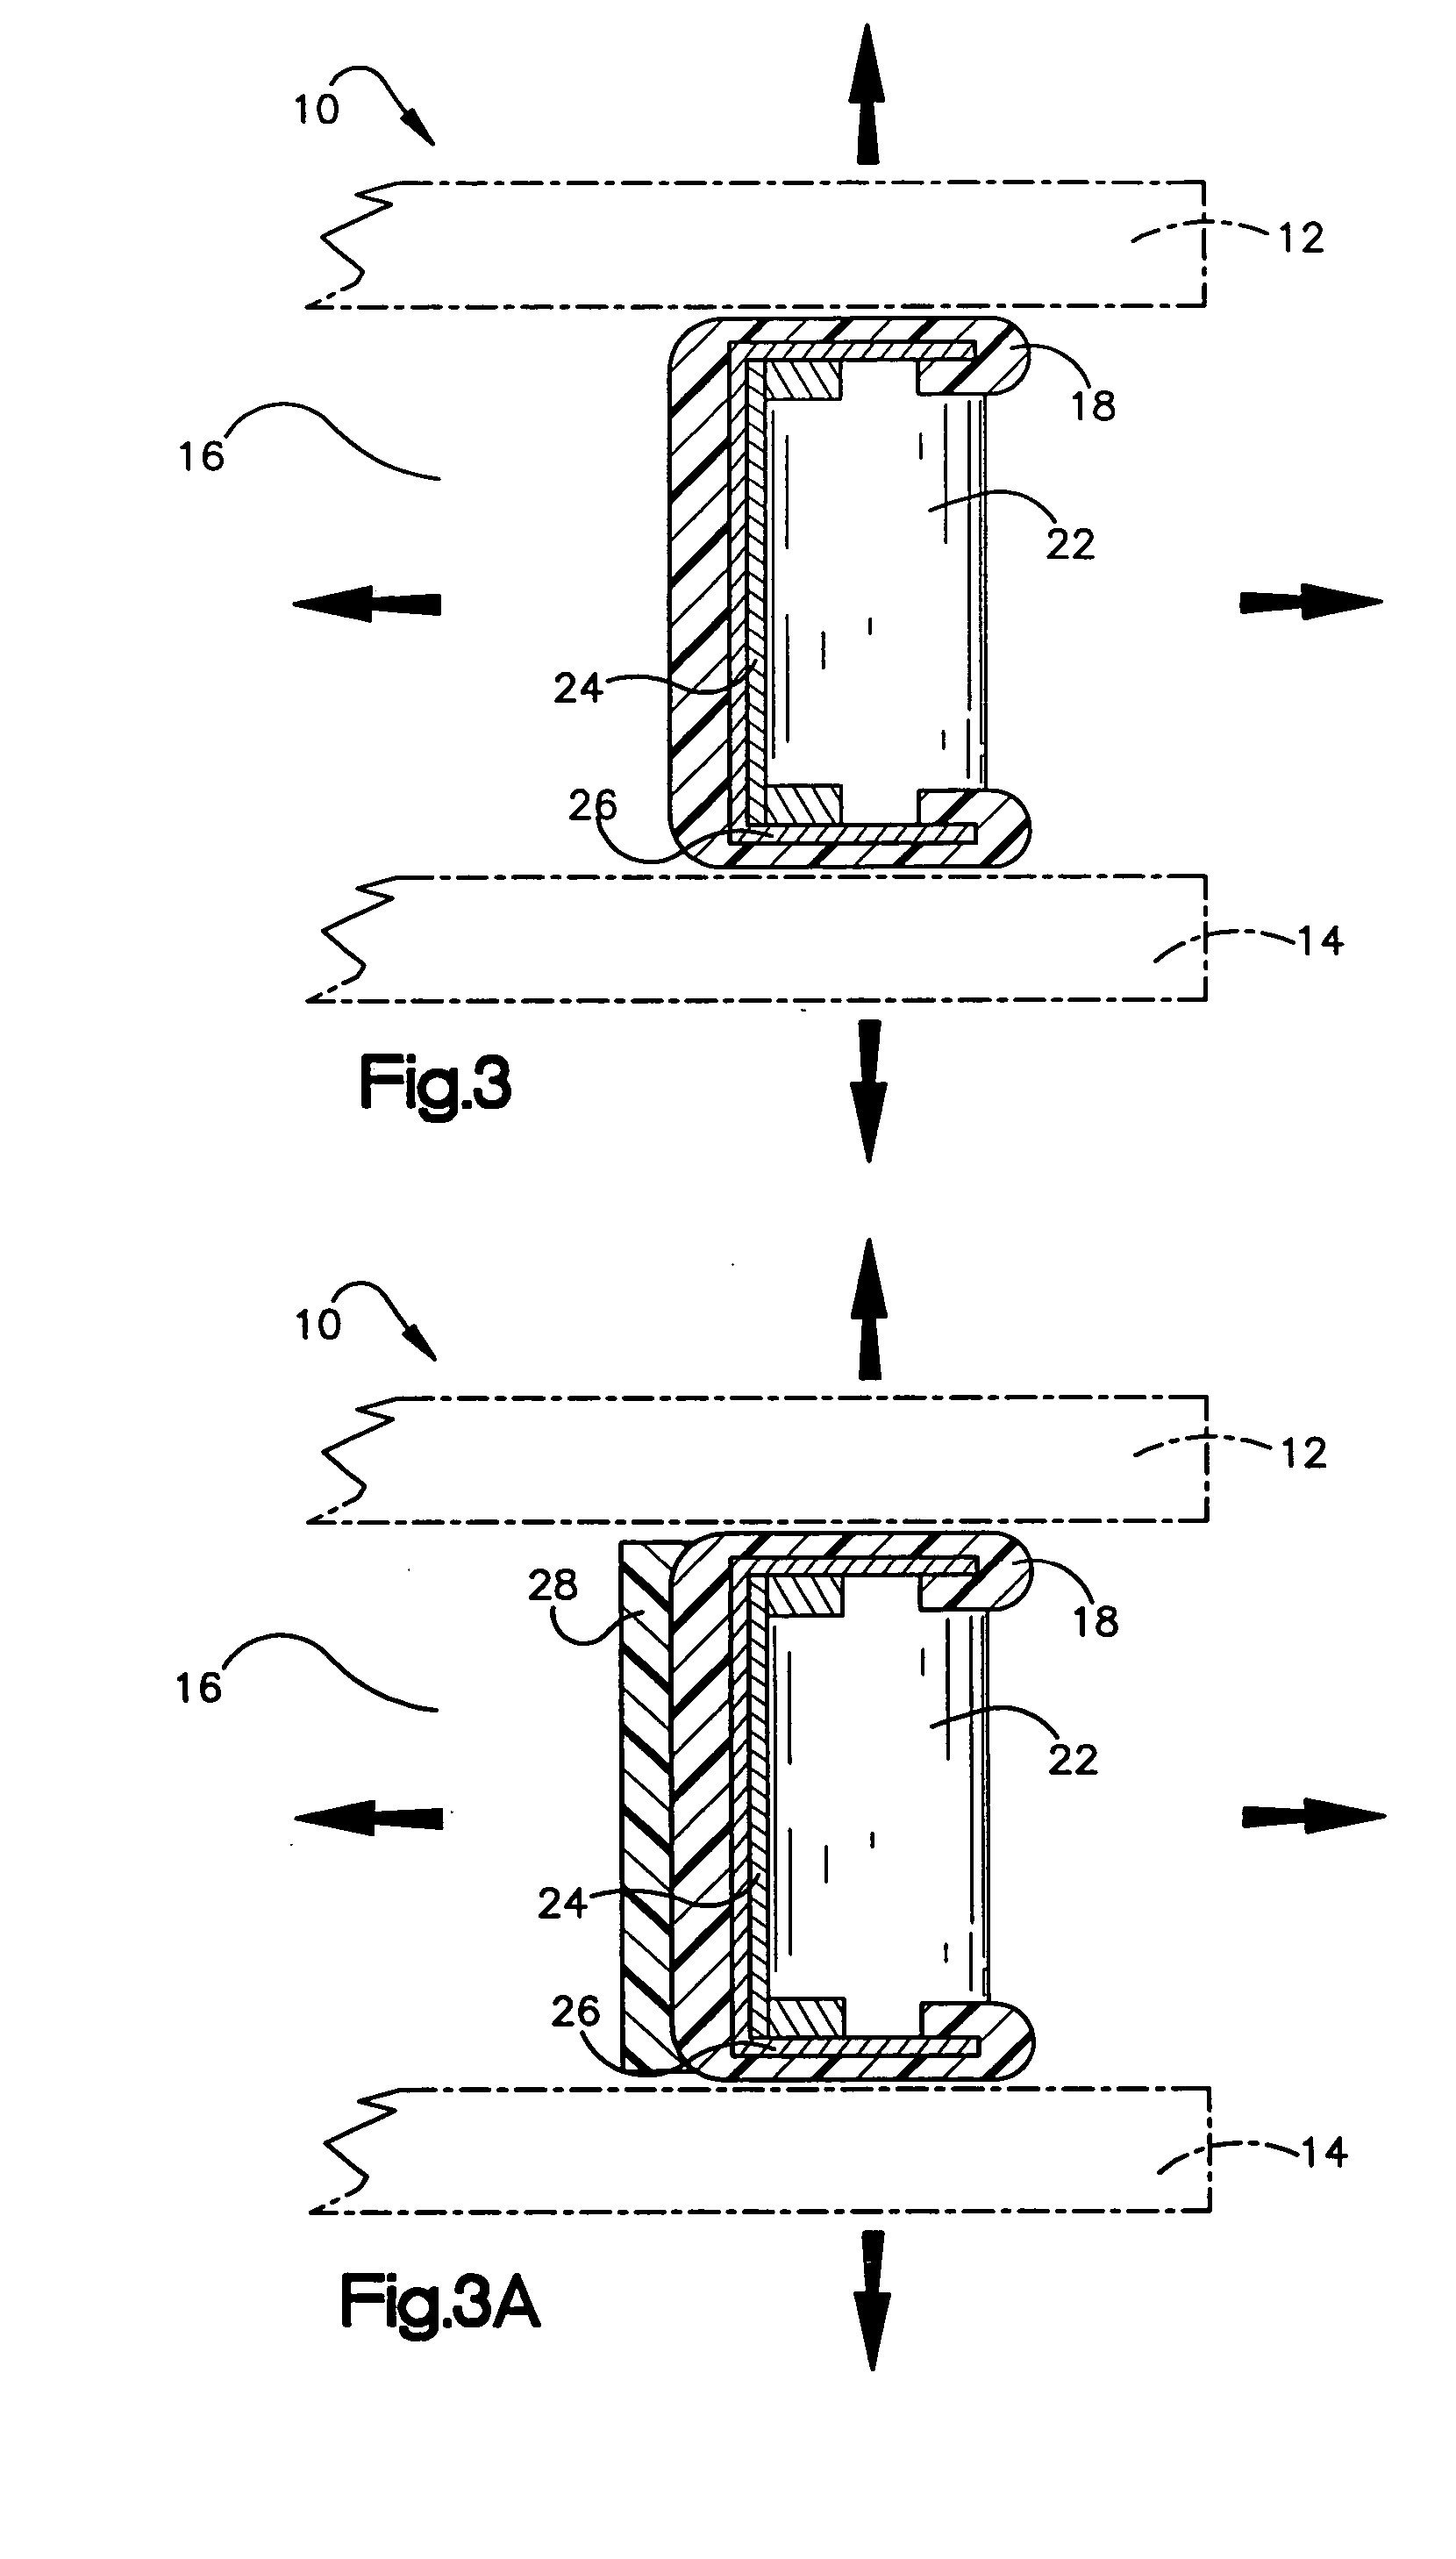 Continuous flexible spacer assembly having sealant support member